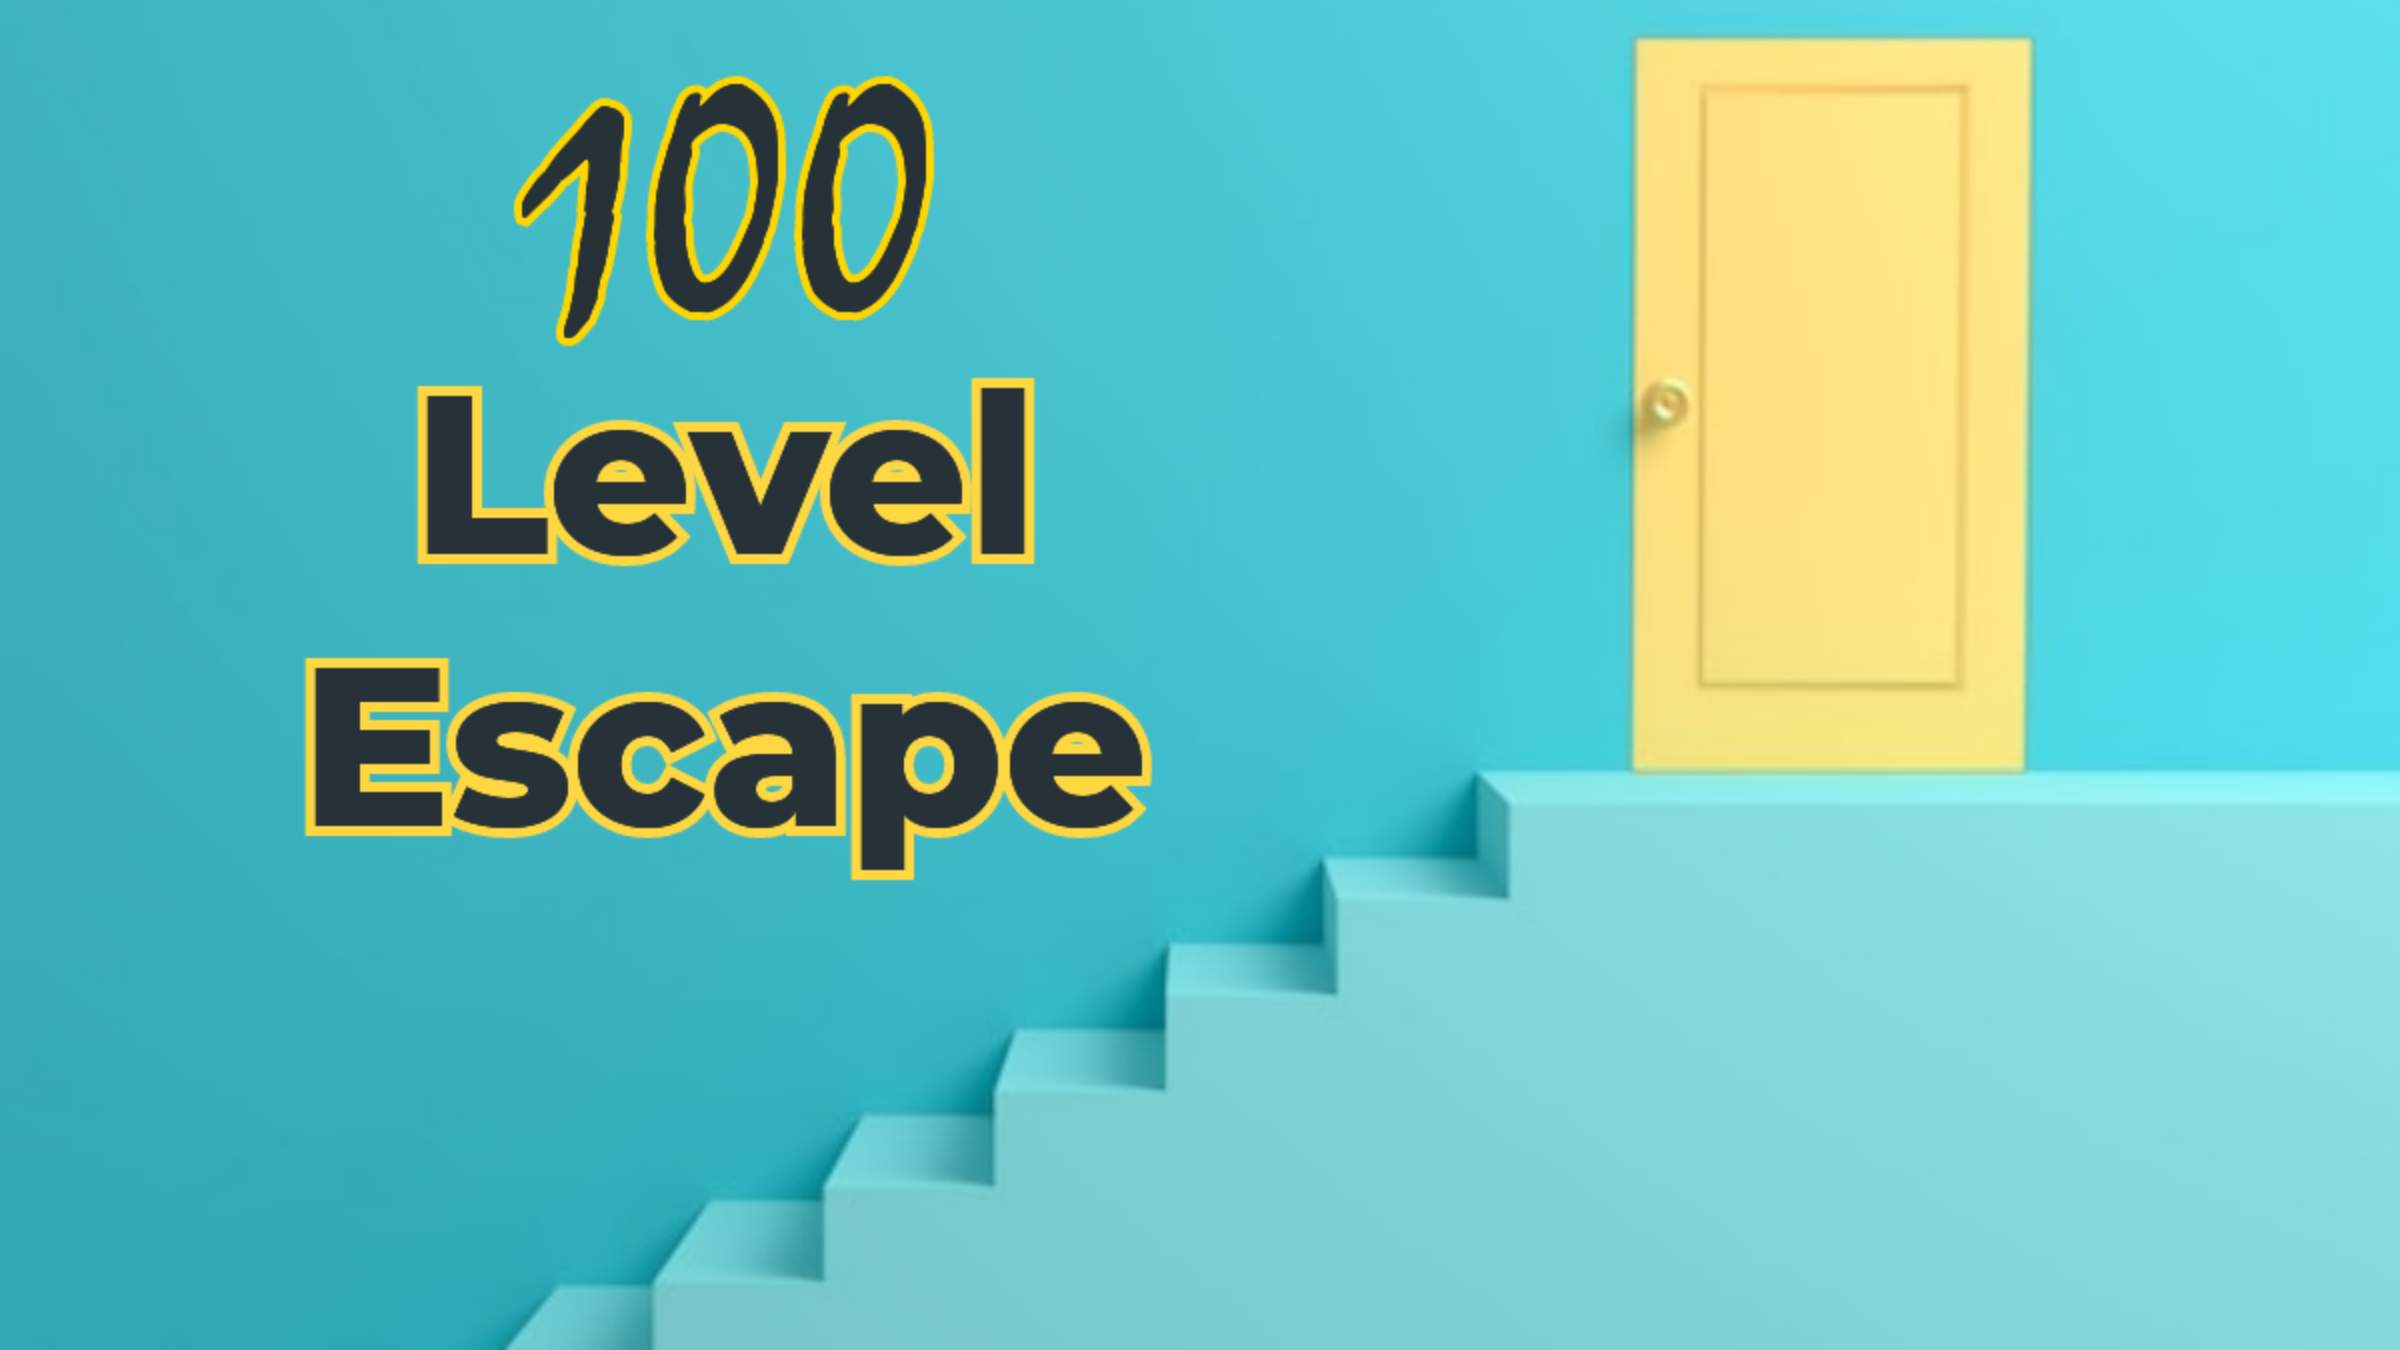 Another 100 Level Escape